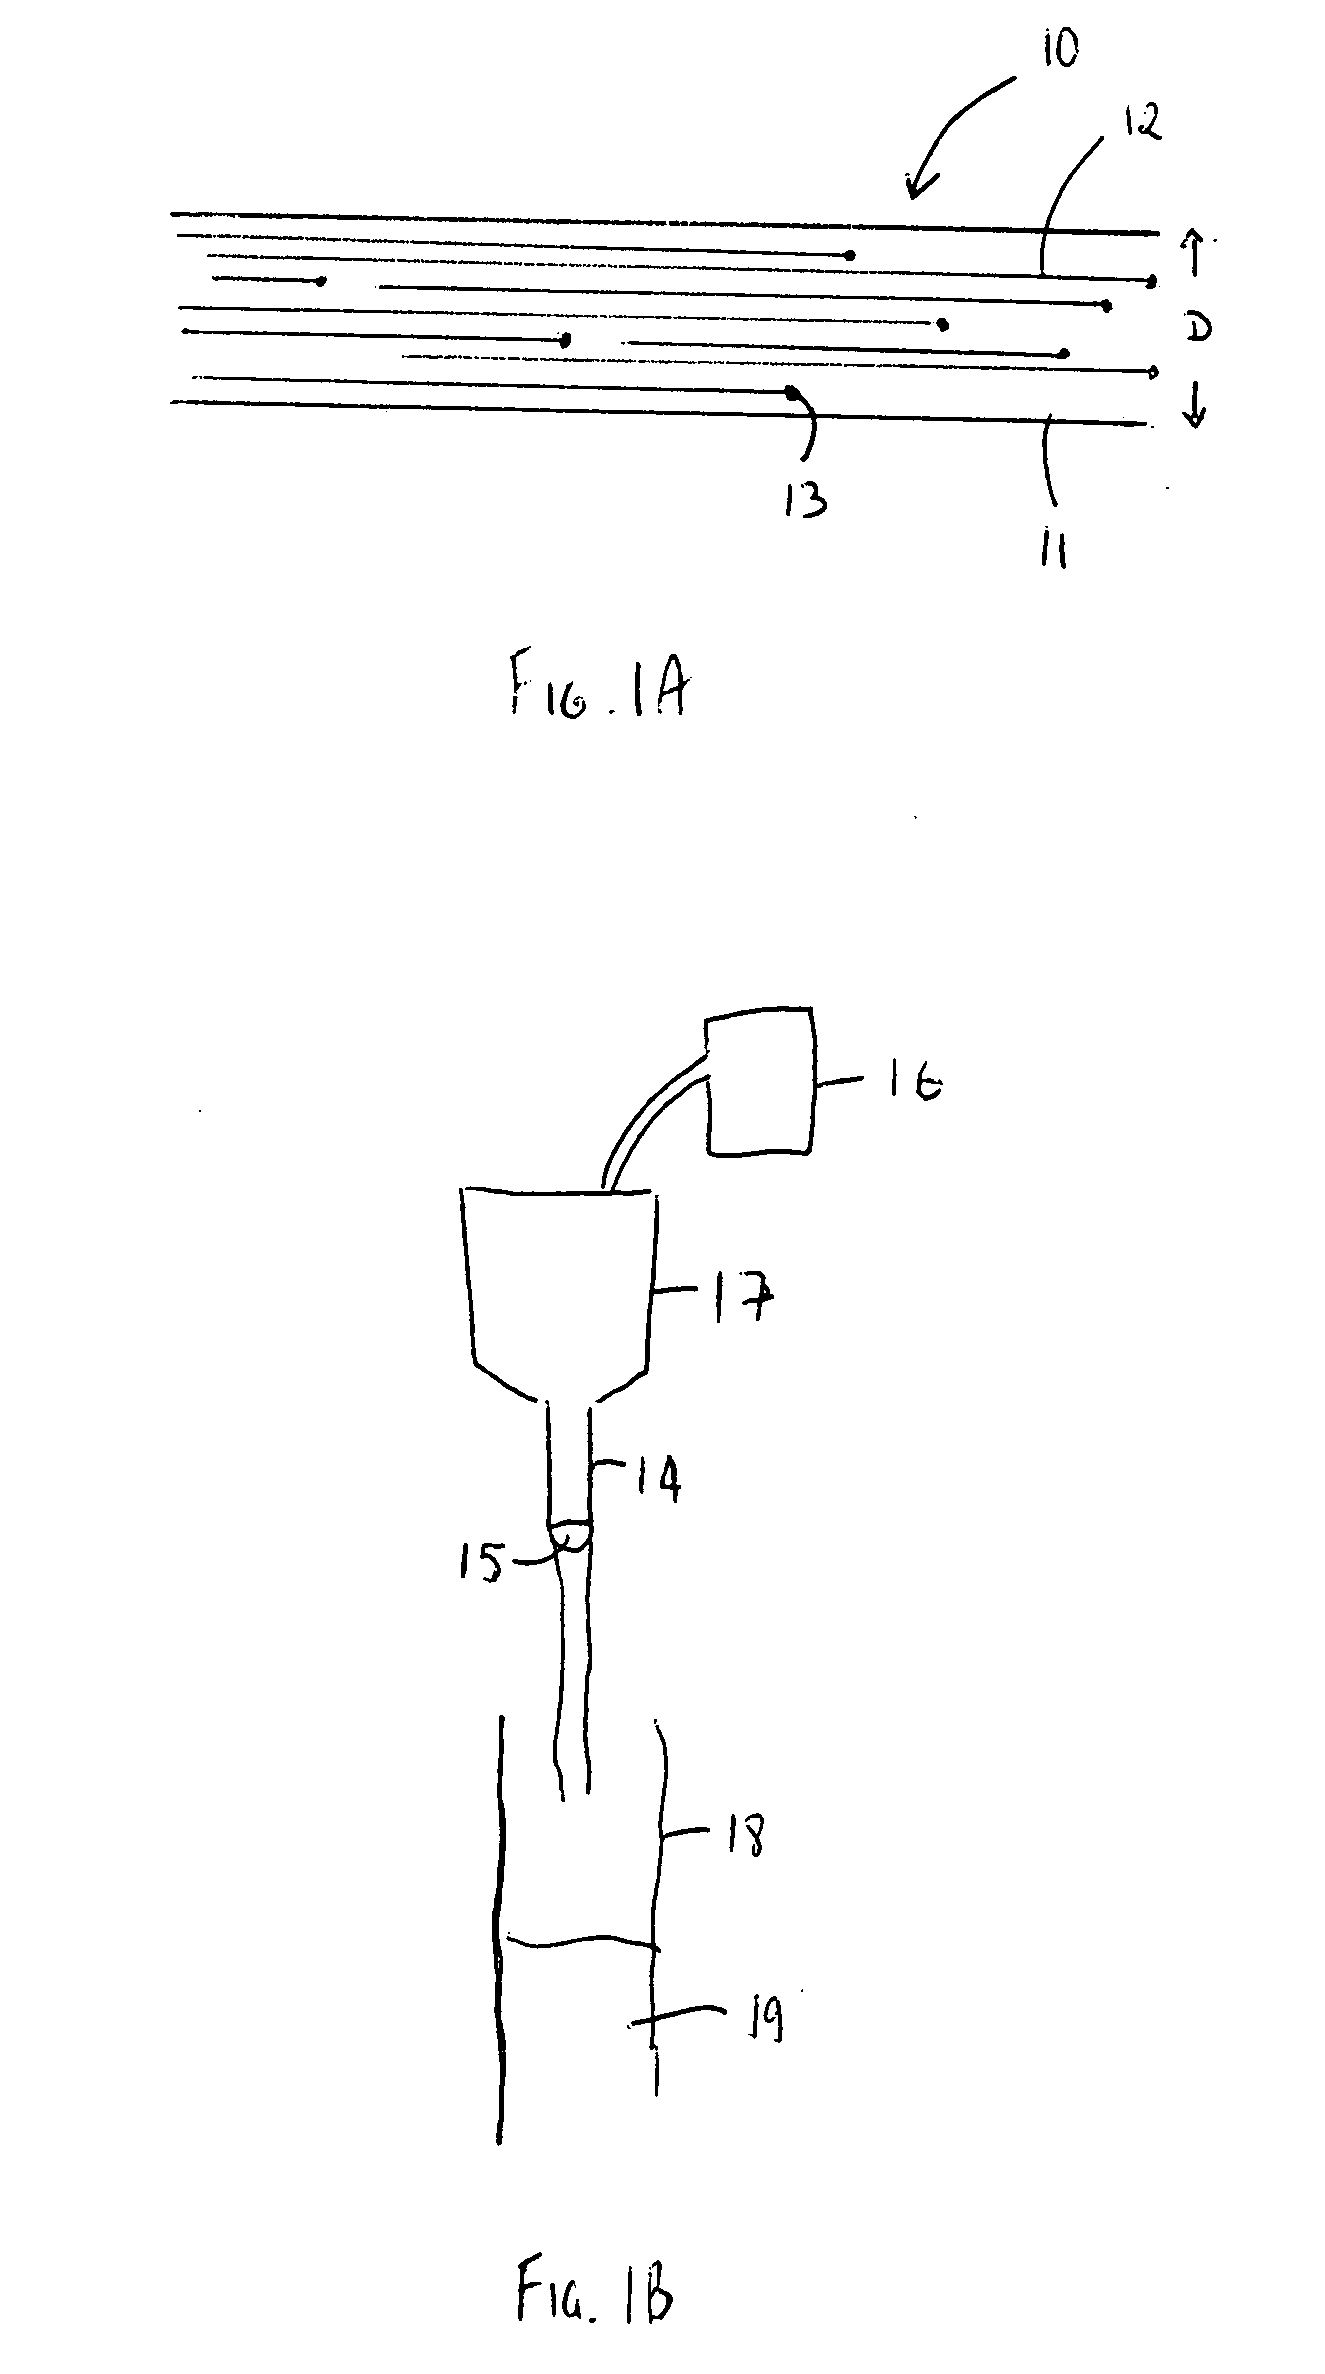 Continuous glassy carbon composite materials reinforced with carbon nanotubes and methods of manufacturing same